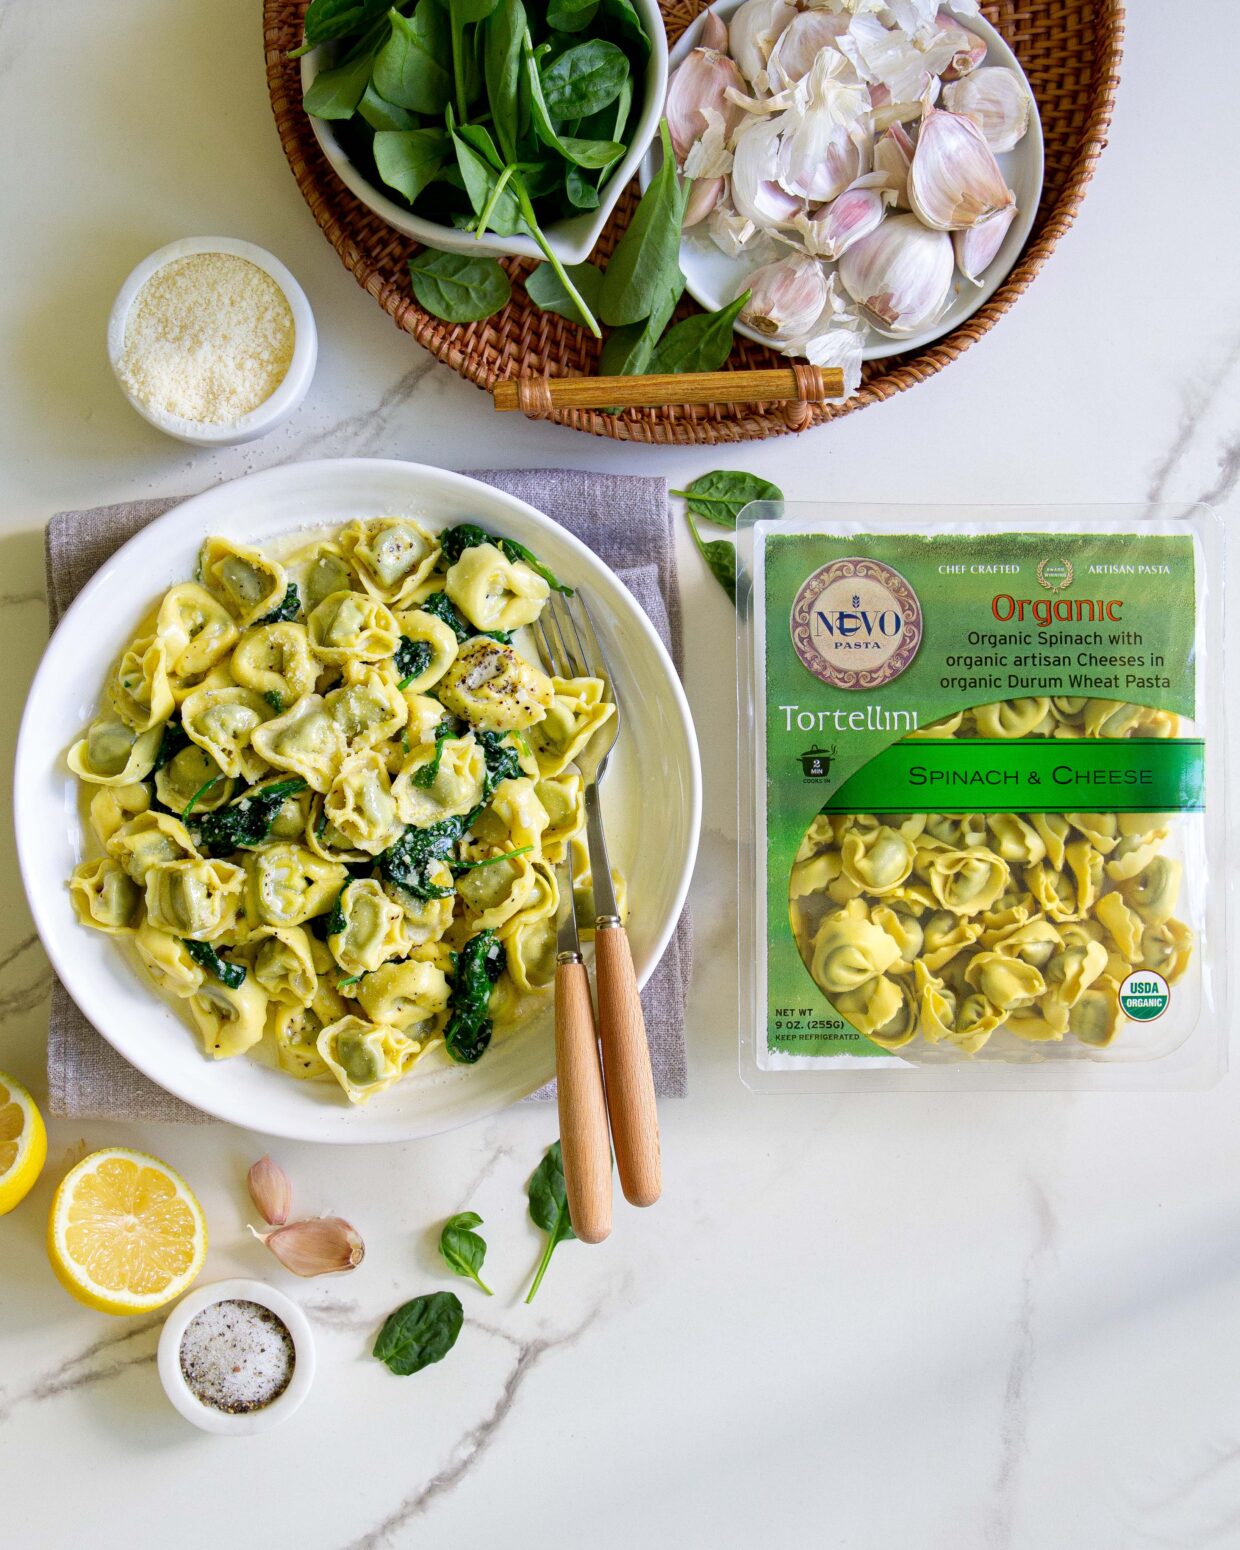 Organic Spinach and Cheese Tortellini with Lemon, Spinach, and Parmesan Cream